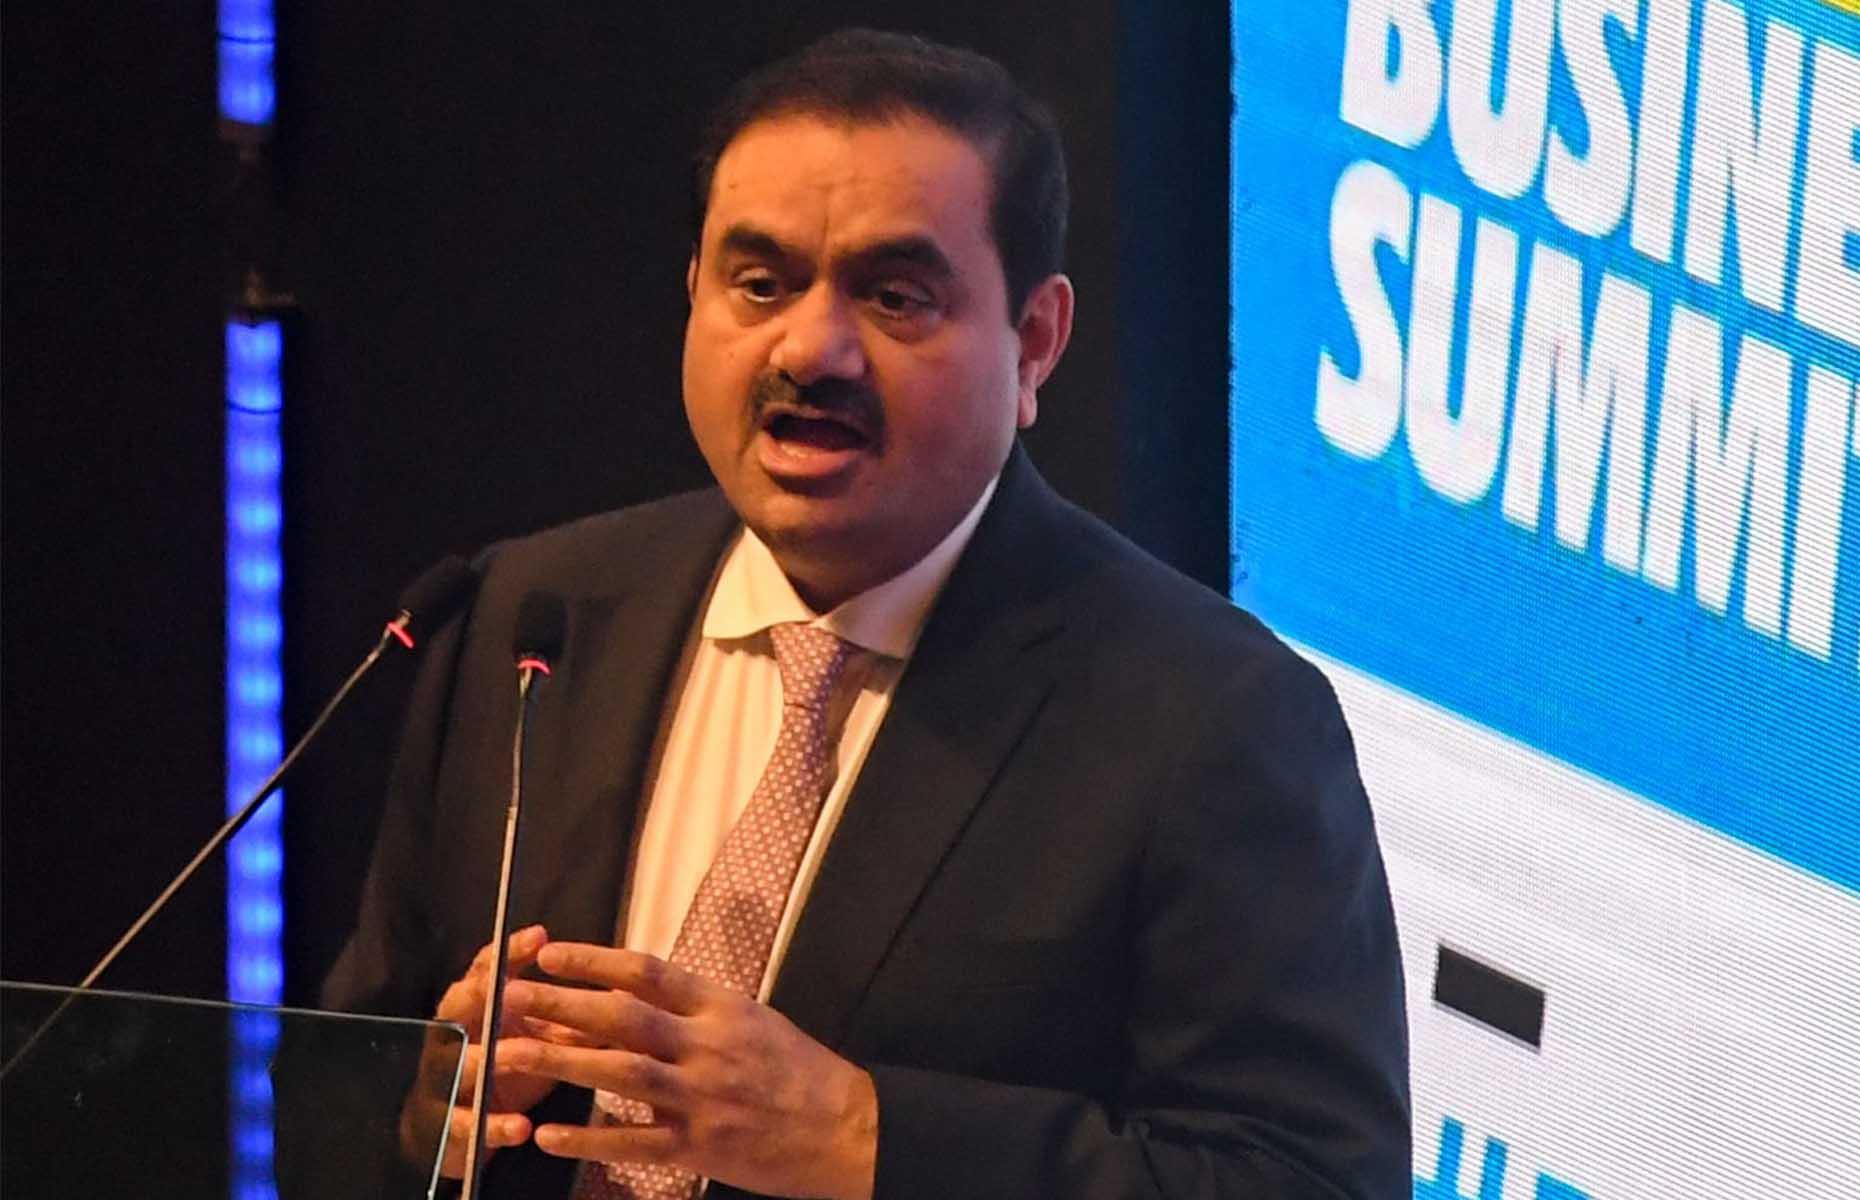 <p>India's Gautam Adani (pictured) is the chairman of the Adani Group, which has interests in ports, airports, energy, edible oils, cement, and real estate. <em>Forbes</em> reports his wealth at $56.1 billion. His older brother Vinod is worth another $14.6 billion, making a family total of $70.7 billion.</p>  <p>At one point, the Adani family's wealth had been estimated at around $150 billion, but recent accusations of fraud and stock market manipulation have caused the group's shares to plummet, along with much of their net worth. </p>